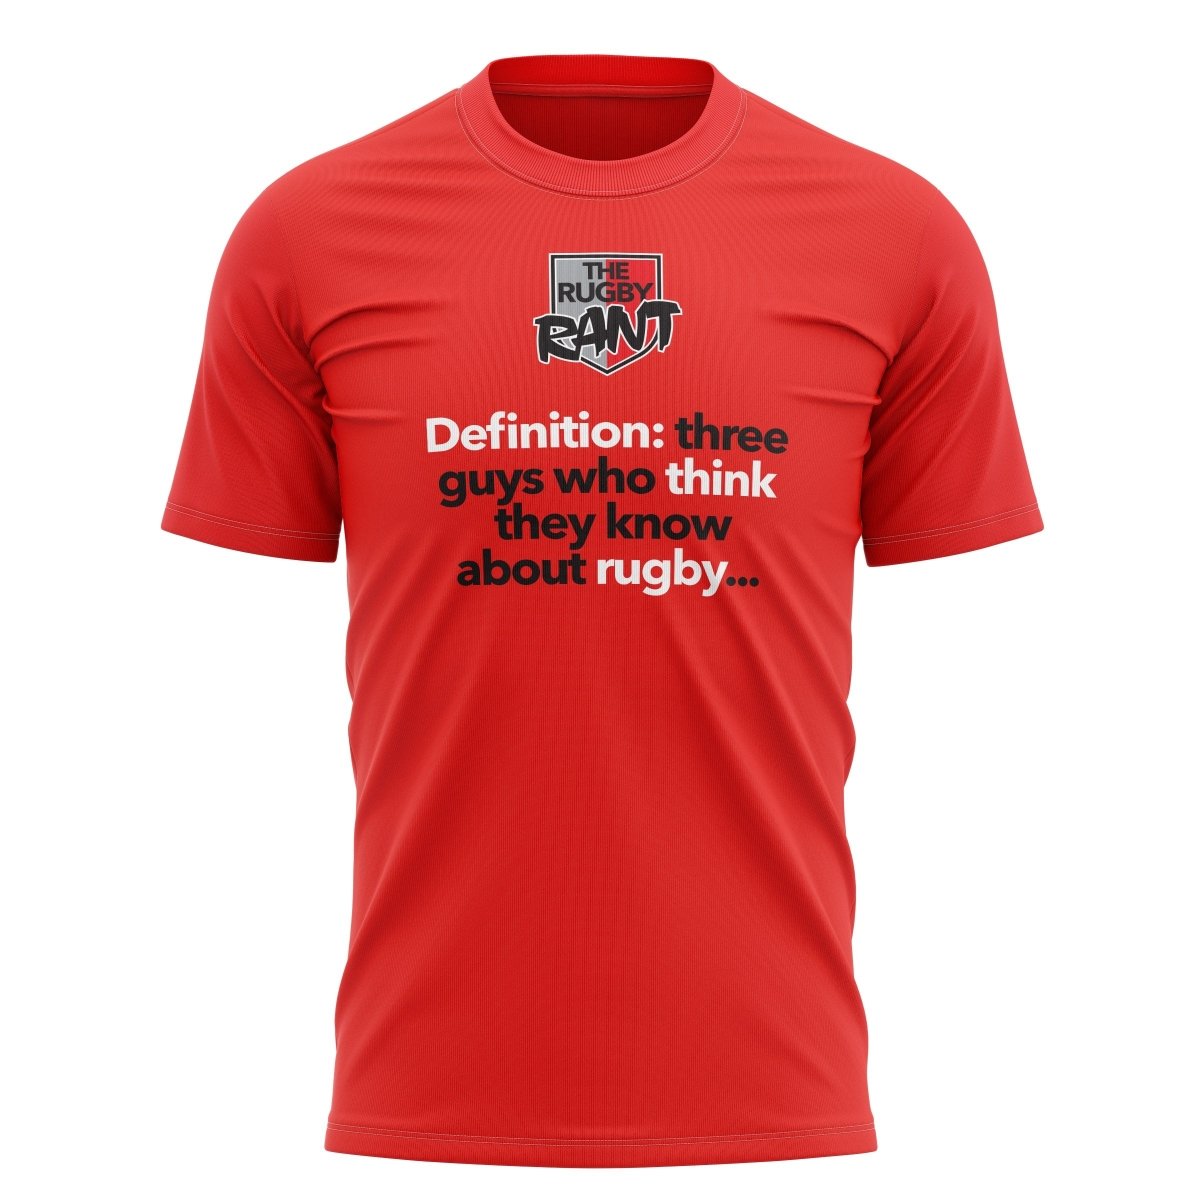 The Rugby Rant &quot;Definition&quot; Tee - Unisex - www.therugbyshop.com www.therugbyshop.com SANMAR TEES The Rugby Rant &quot;Definition&quot; Tee - Unisex